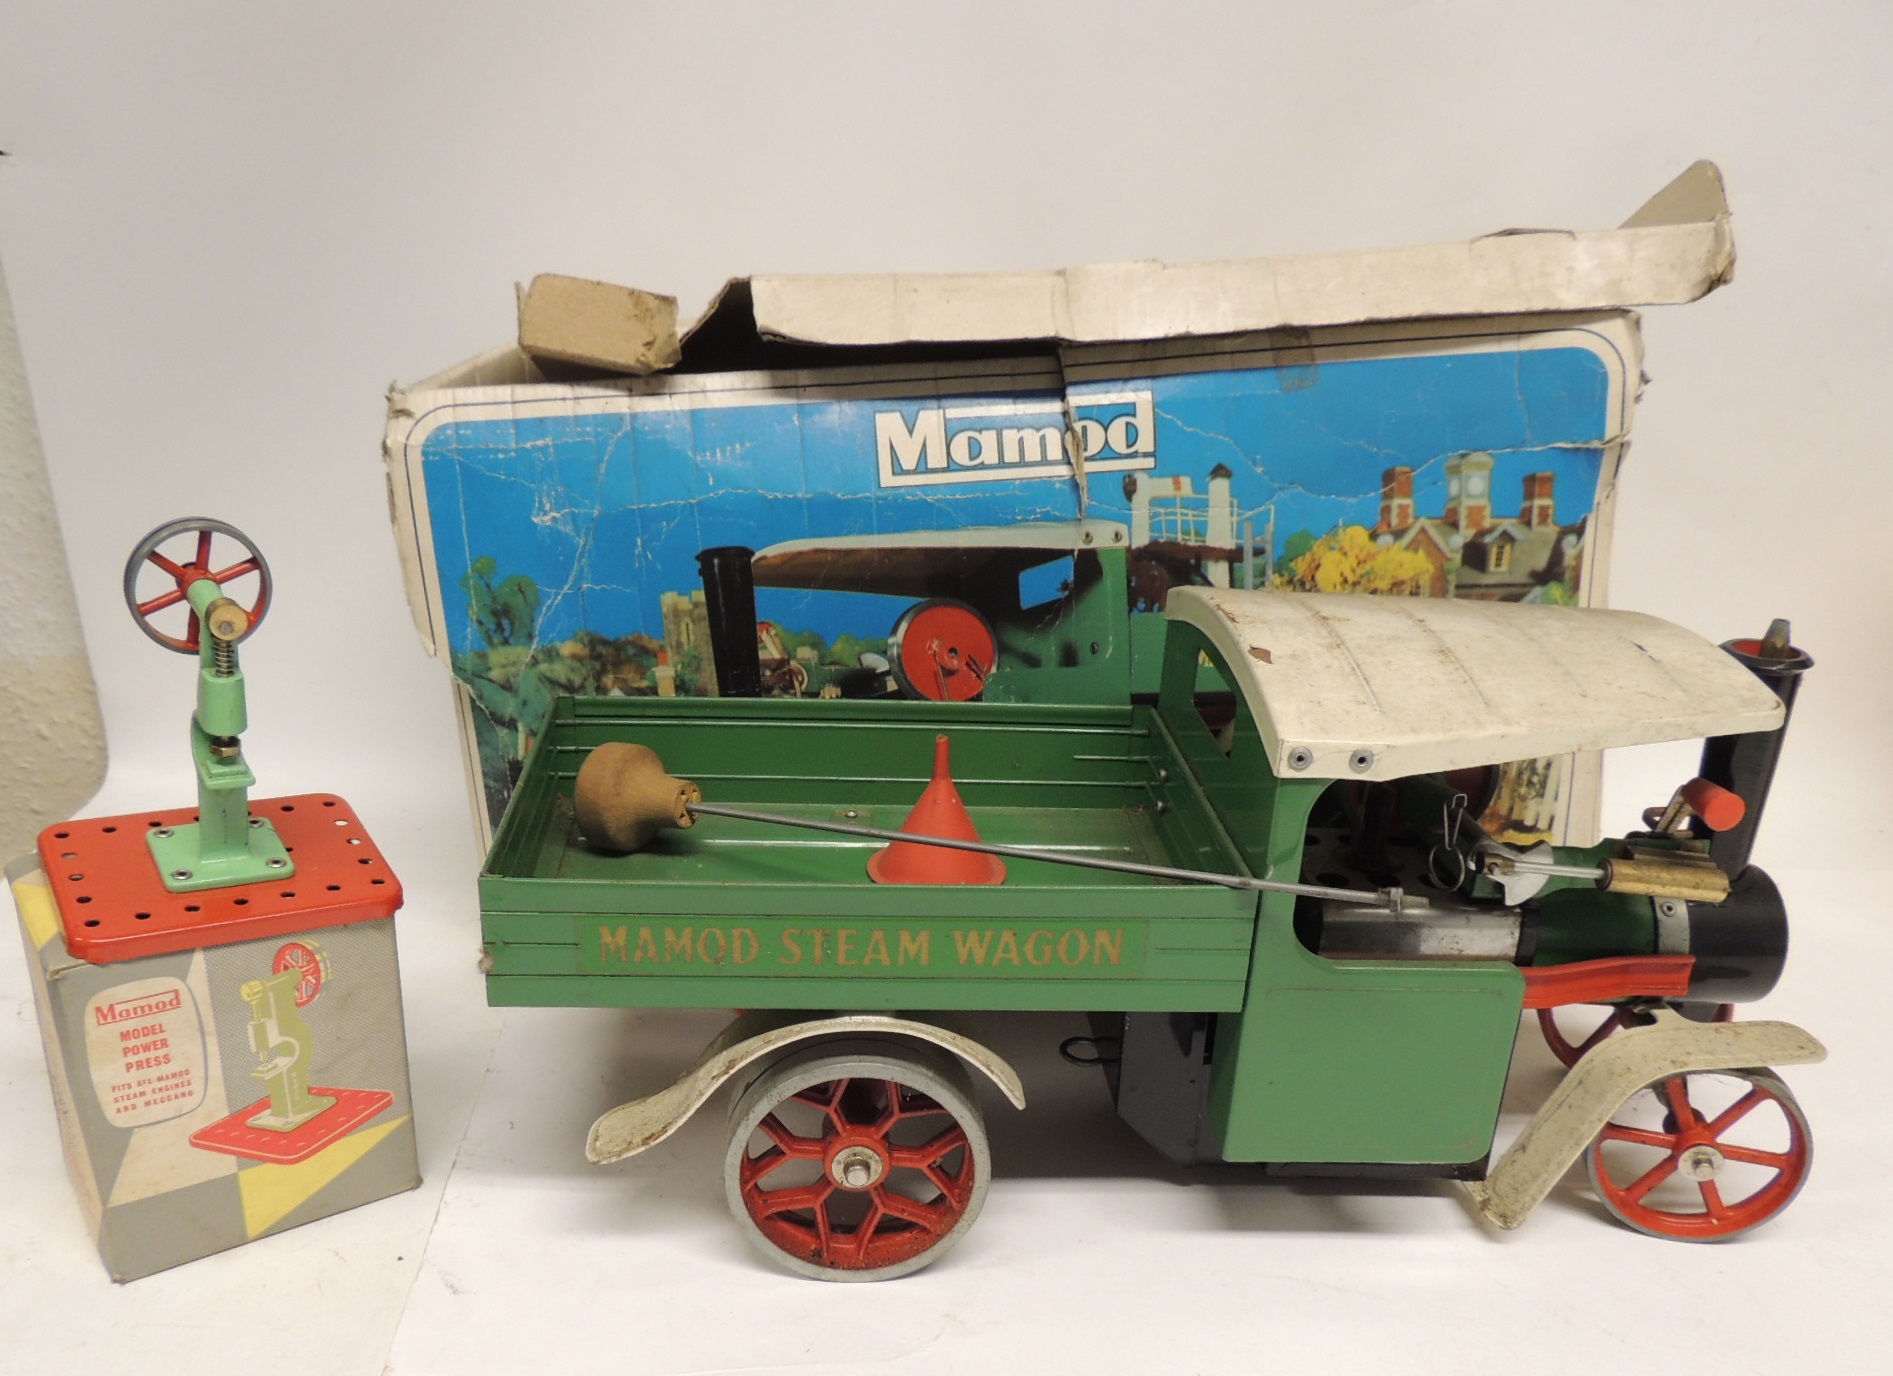 A Mamod Steam Wagon in original box together with steering rod, funnel and burner together with a